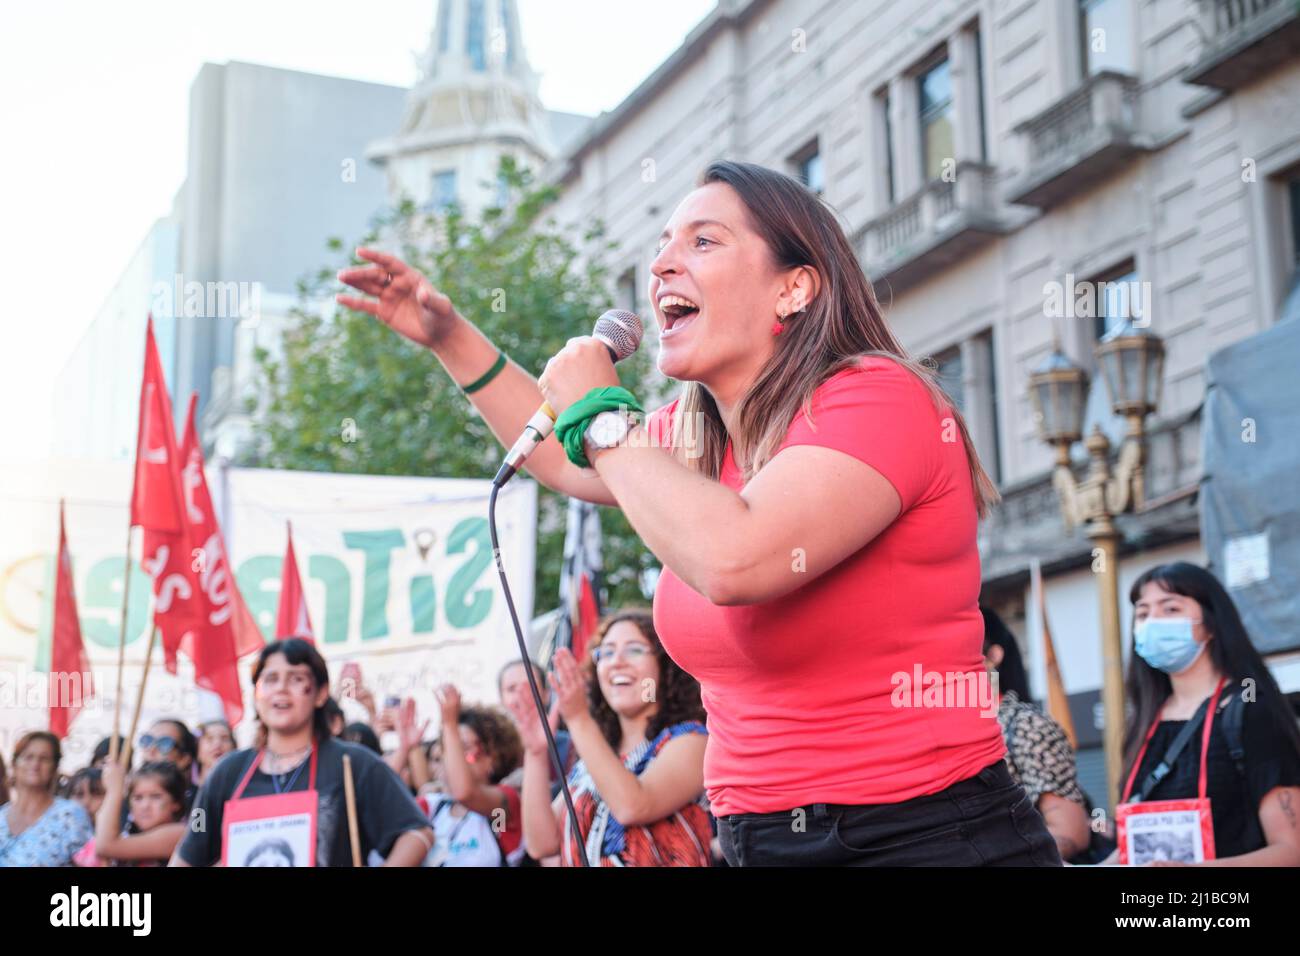 Buenos Aires, Argentina; March 8, 2022: Manuela Castaneira, national leader of Nuevo MAS and Las Rojas, cheering a group of women during the national Stock Photo